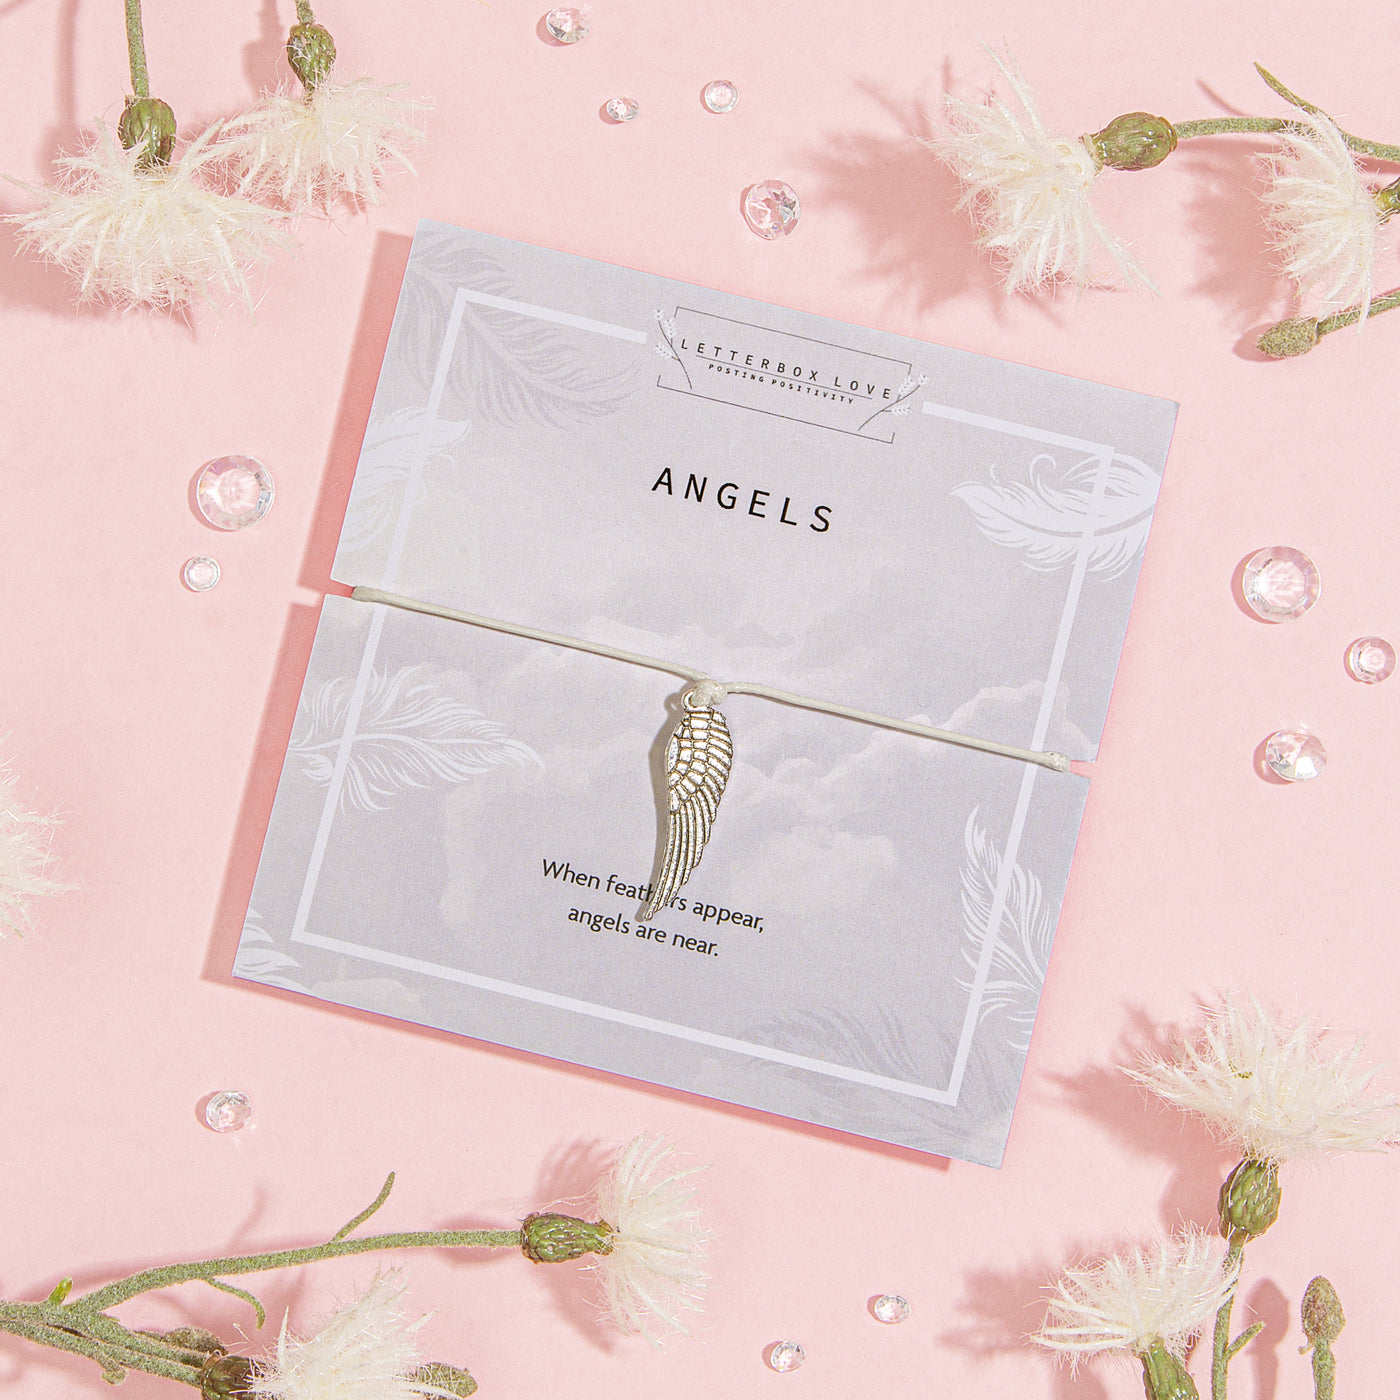 Elegant 'Angels' card on a soft pink background, decorated with subtle feather illustrations and the comforting quote, 'When feathers appear, angels are near.' Paired with the card is a delicate bracelet featuring a detailed angel wing charm. 